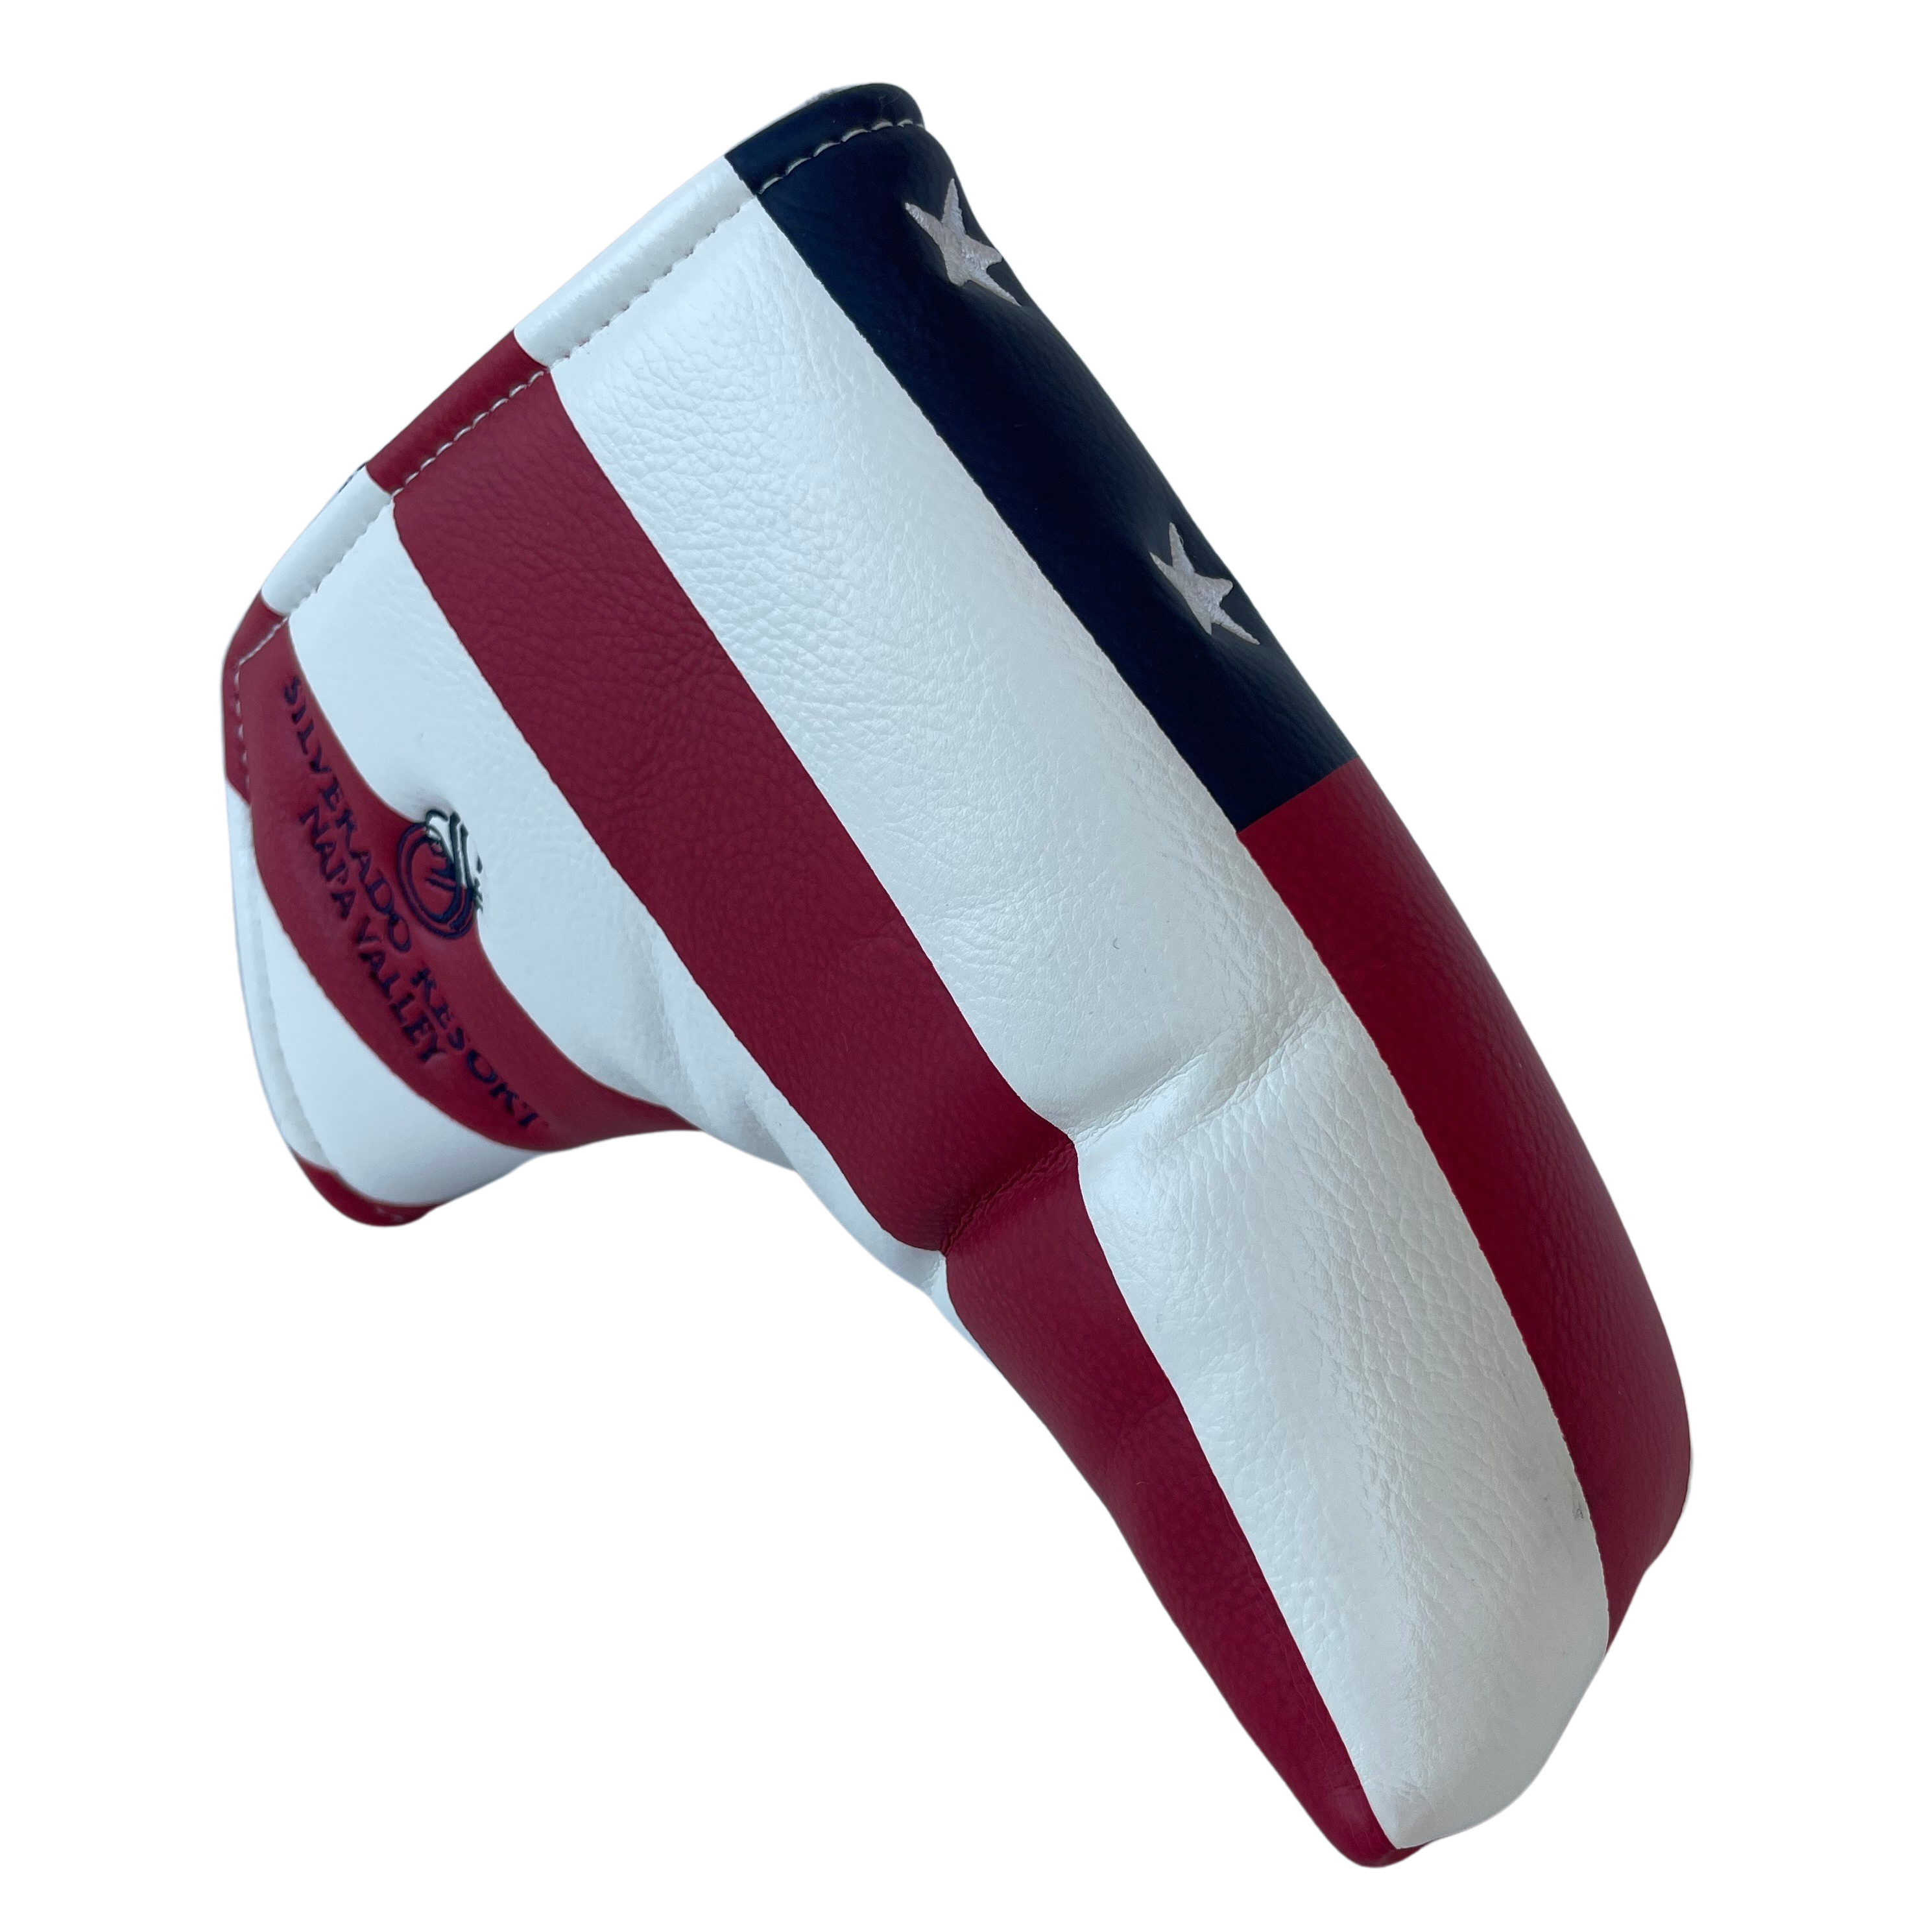 BEARWD of Blade Putter Cover